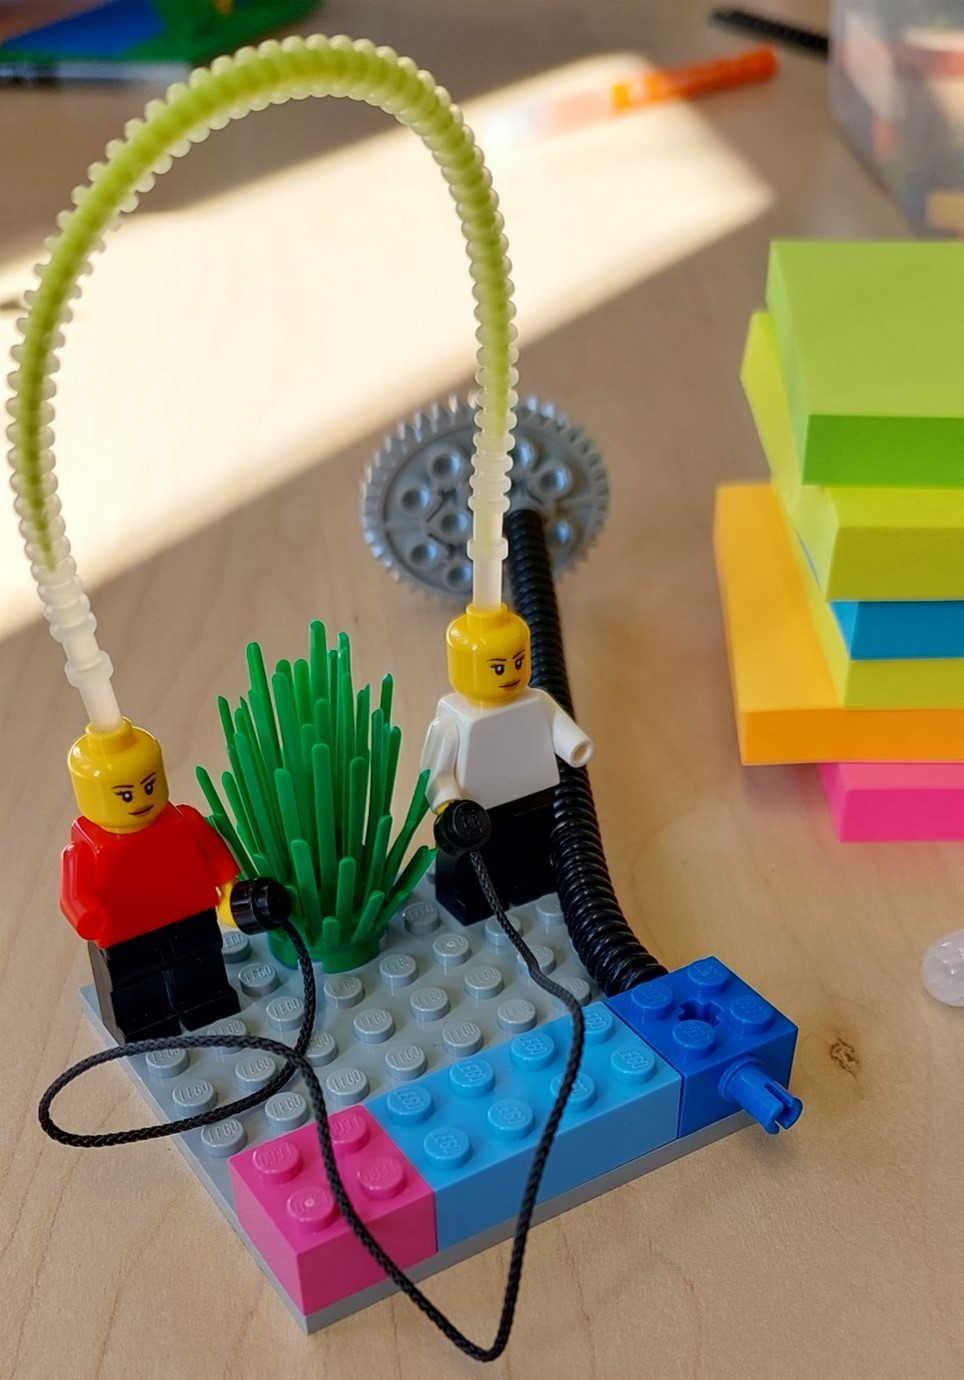 Two LEGO® figurines joined together by two connecting cables, one going from head-to-head, the other going from hand-to-hand. A stack of colorful sticky notes in the back.